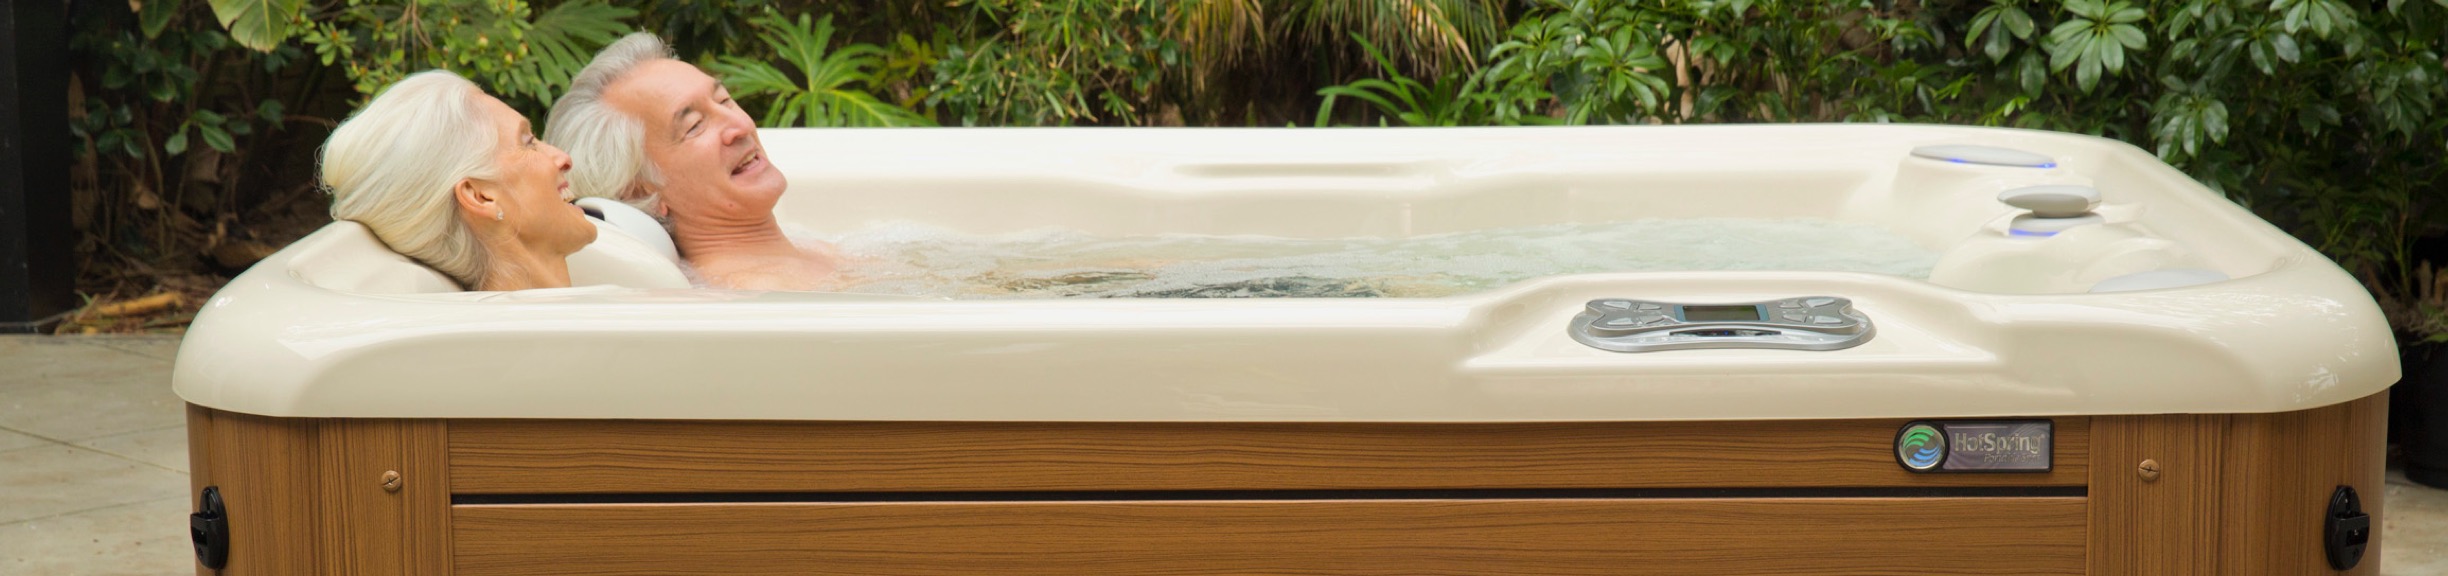 HOT TUBS FOR SALE NEAR ME: NARROWING IN ON THE PERFECT SHOPPING EXPERIENCE